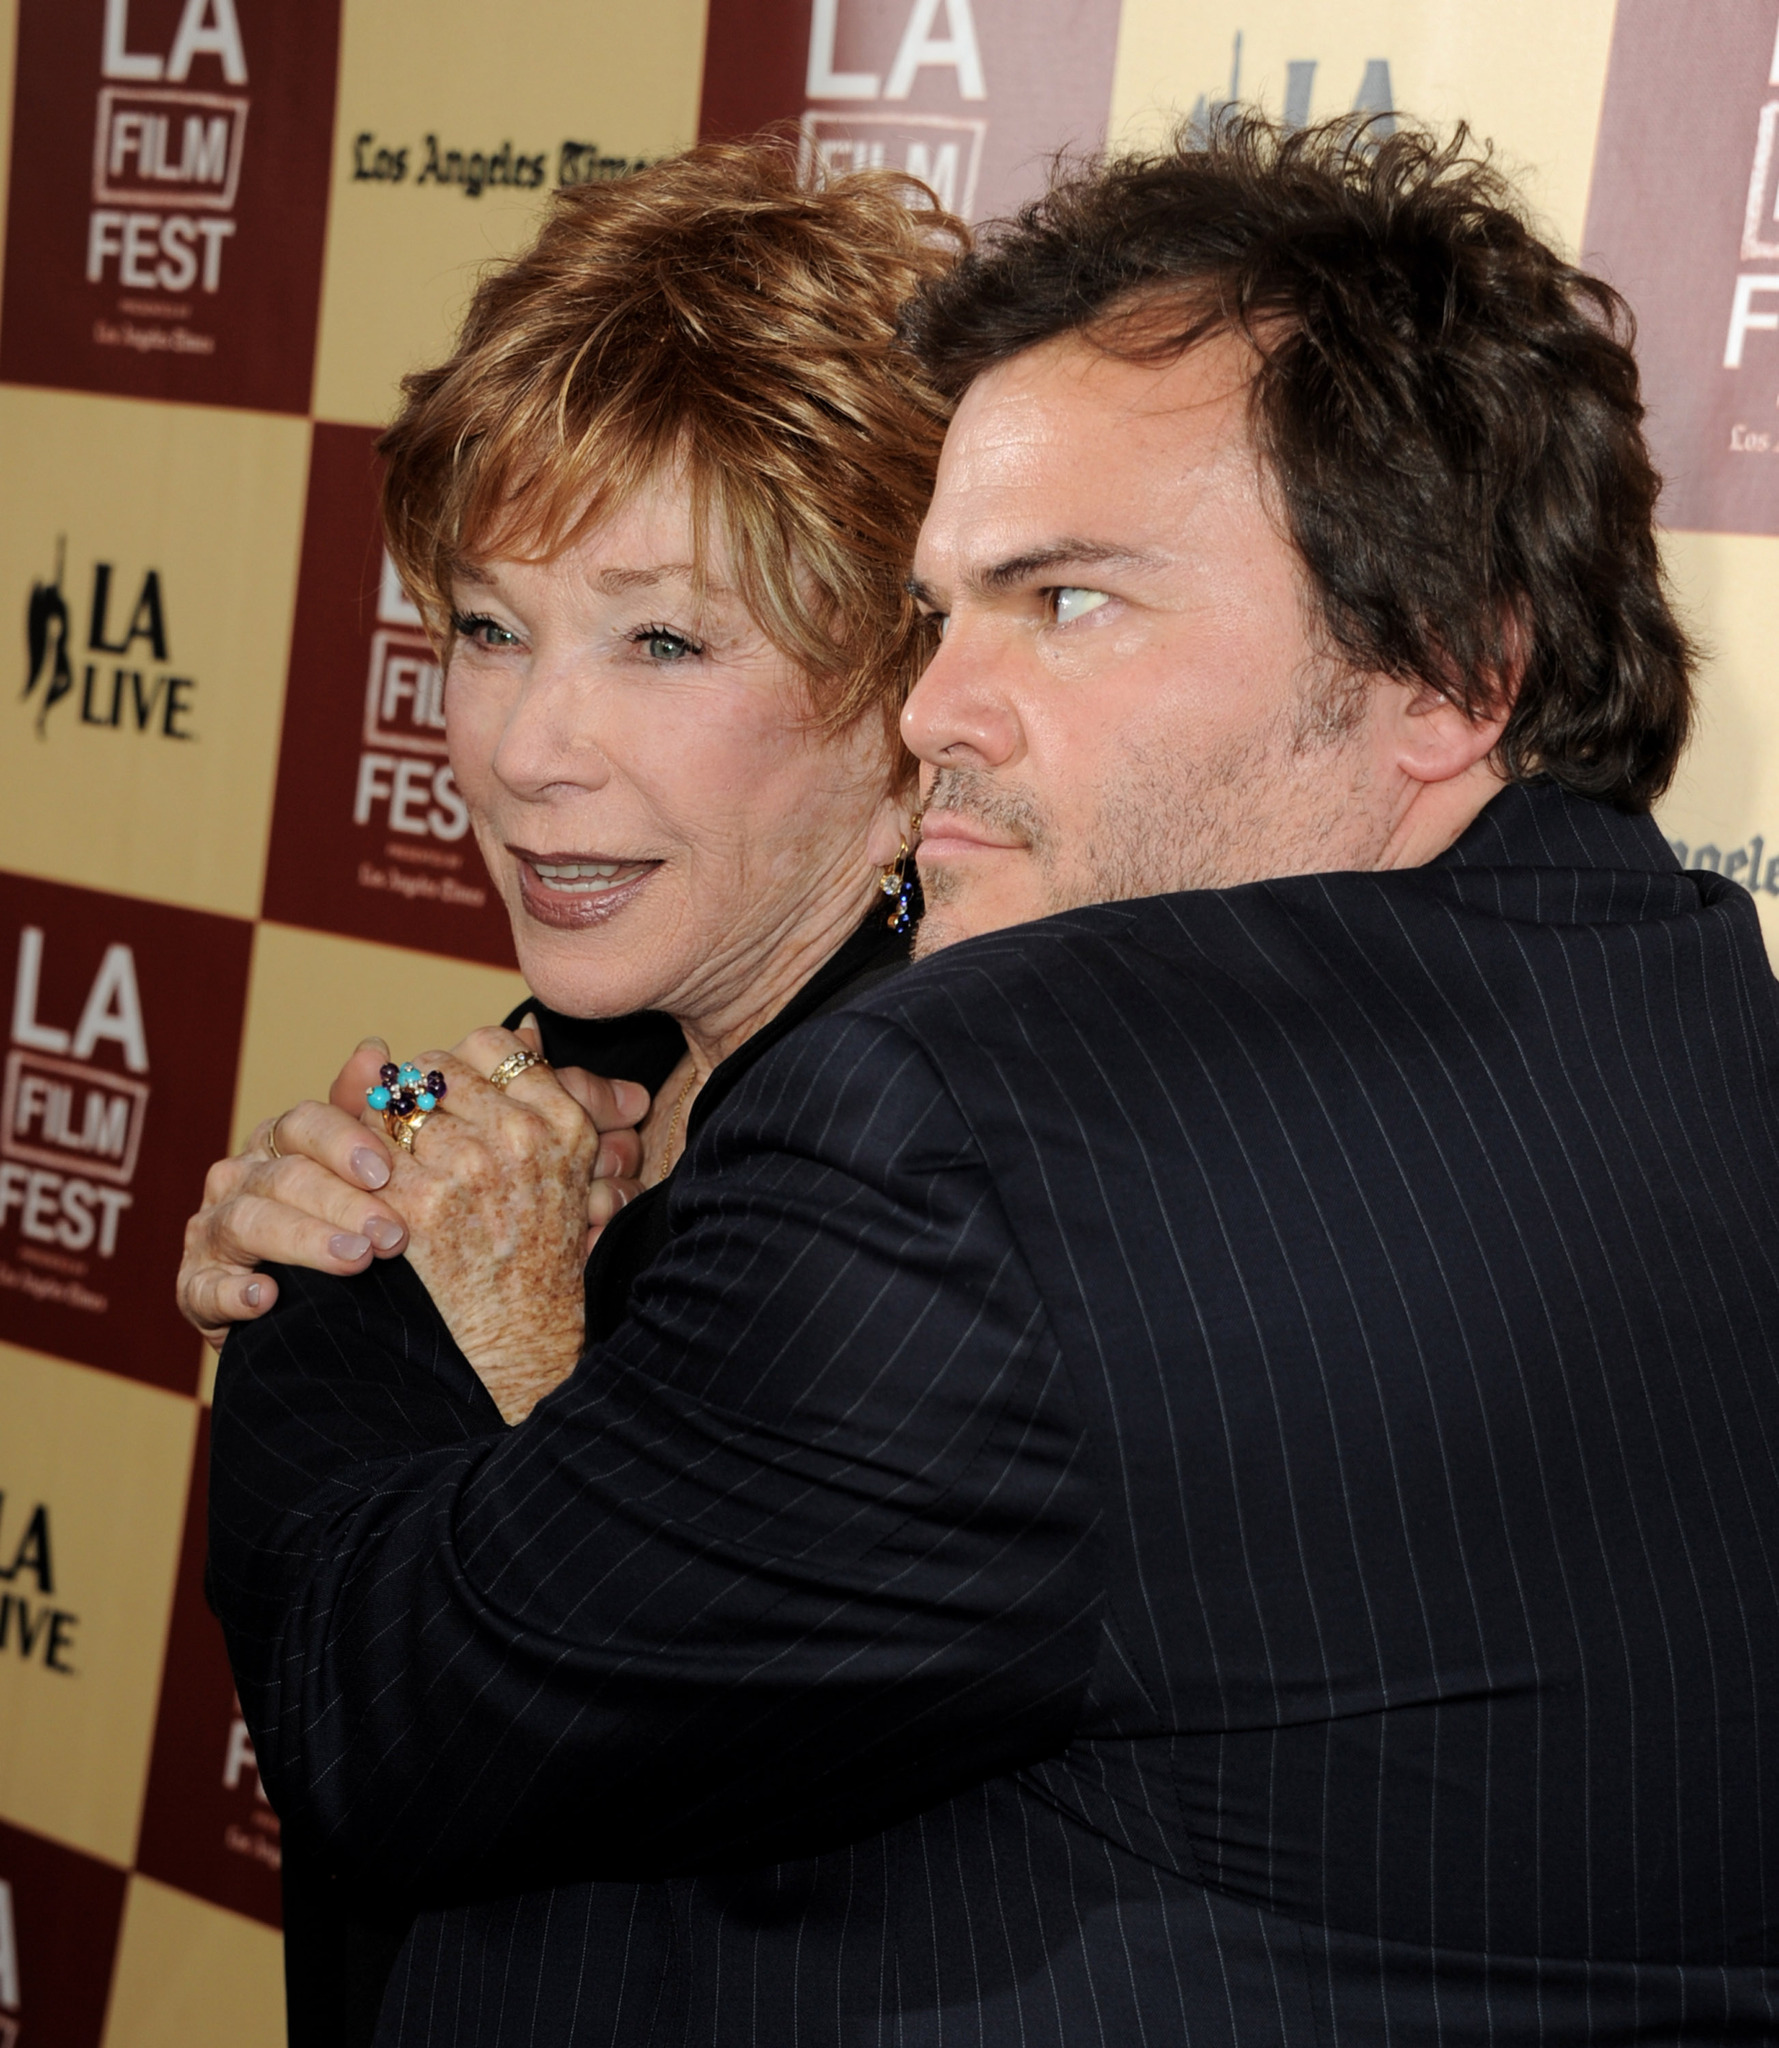 Shirley MacLaine and Jack Black at event of Bernie (2011)